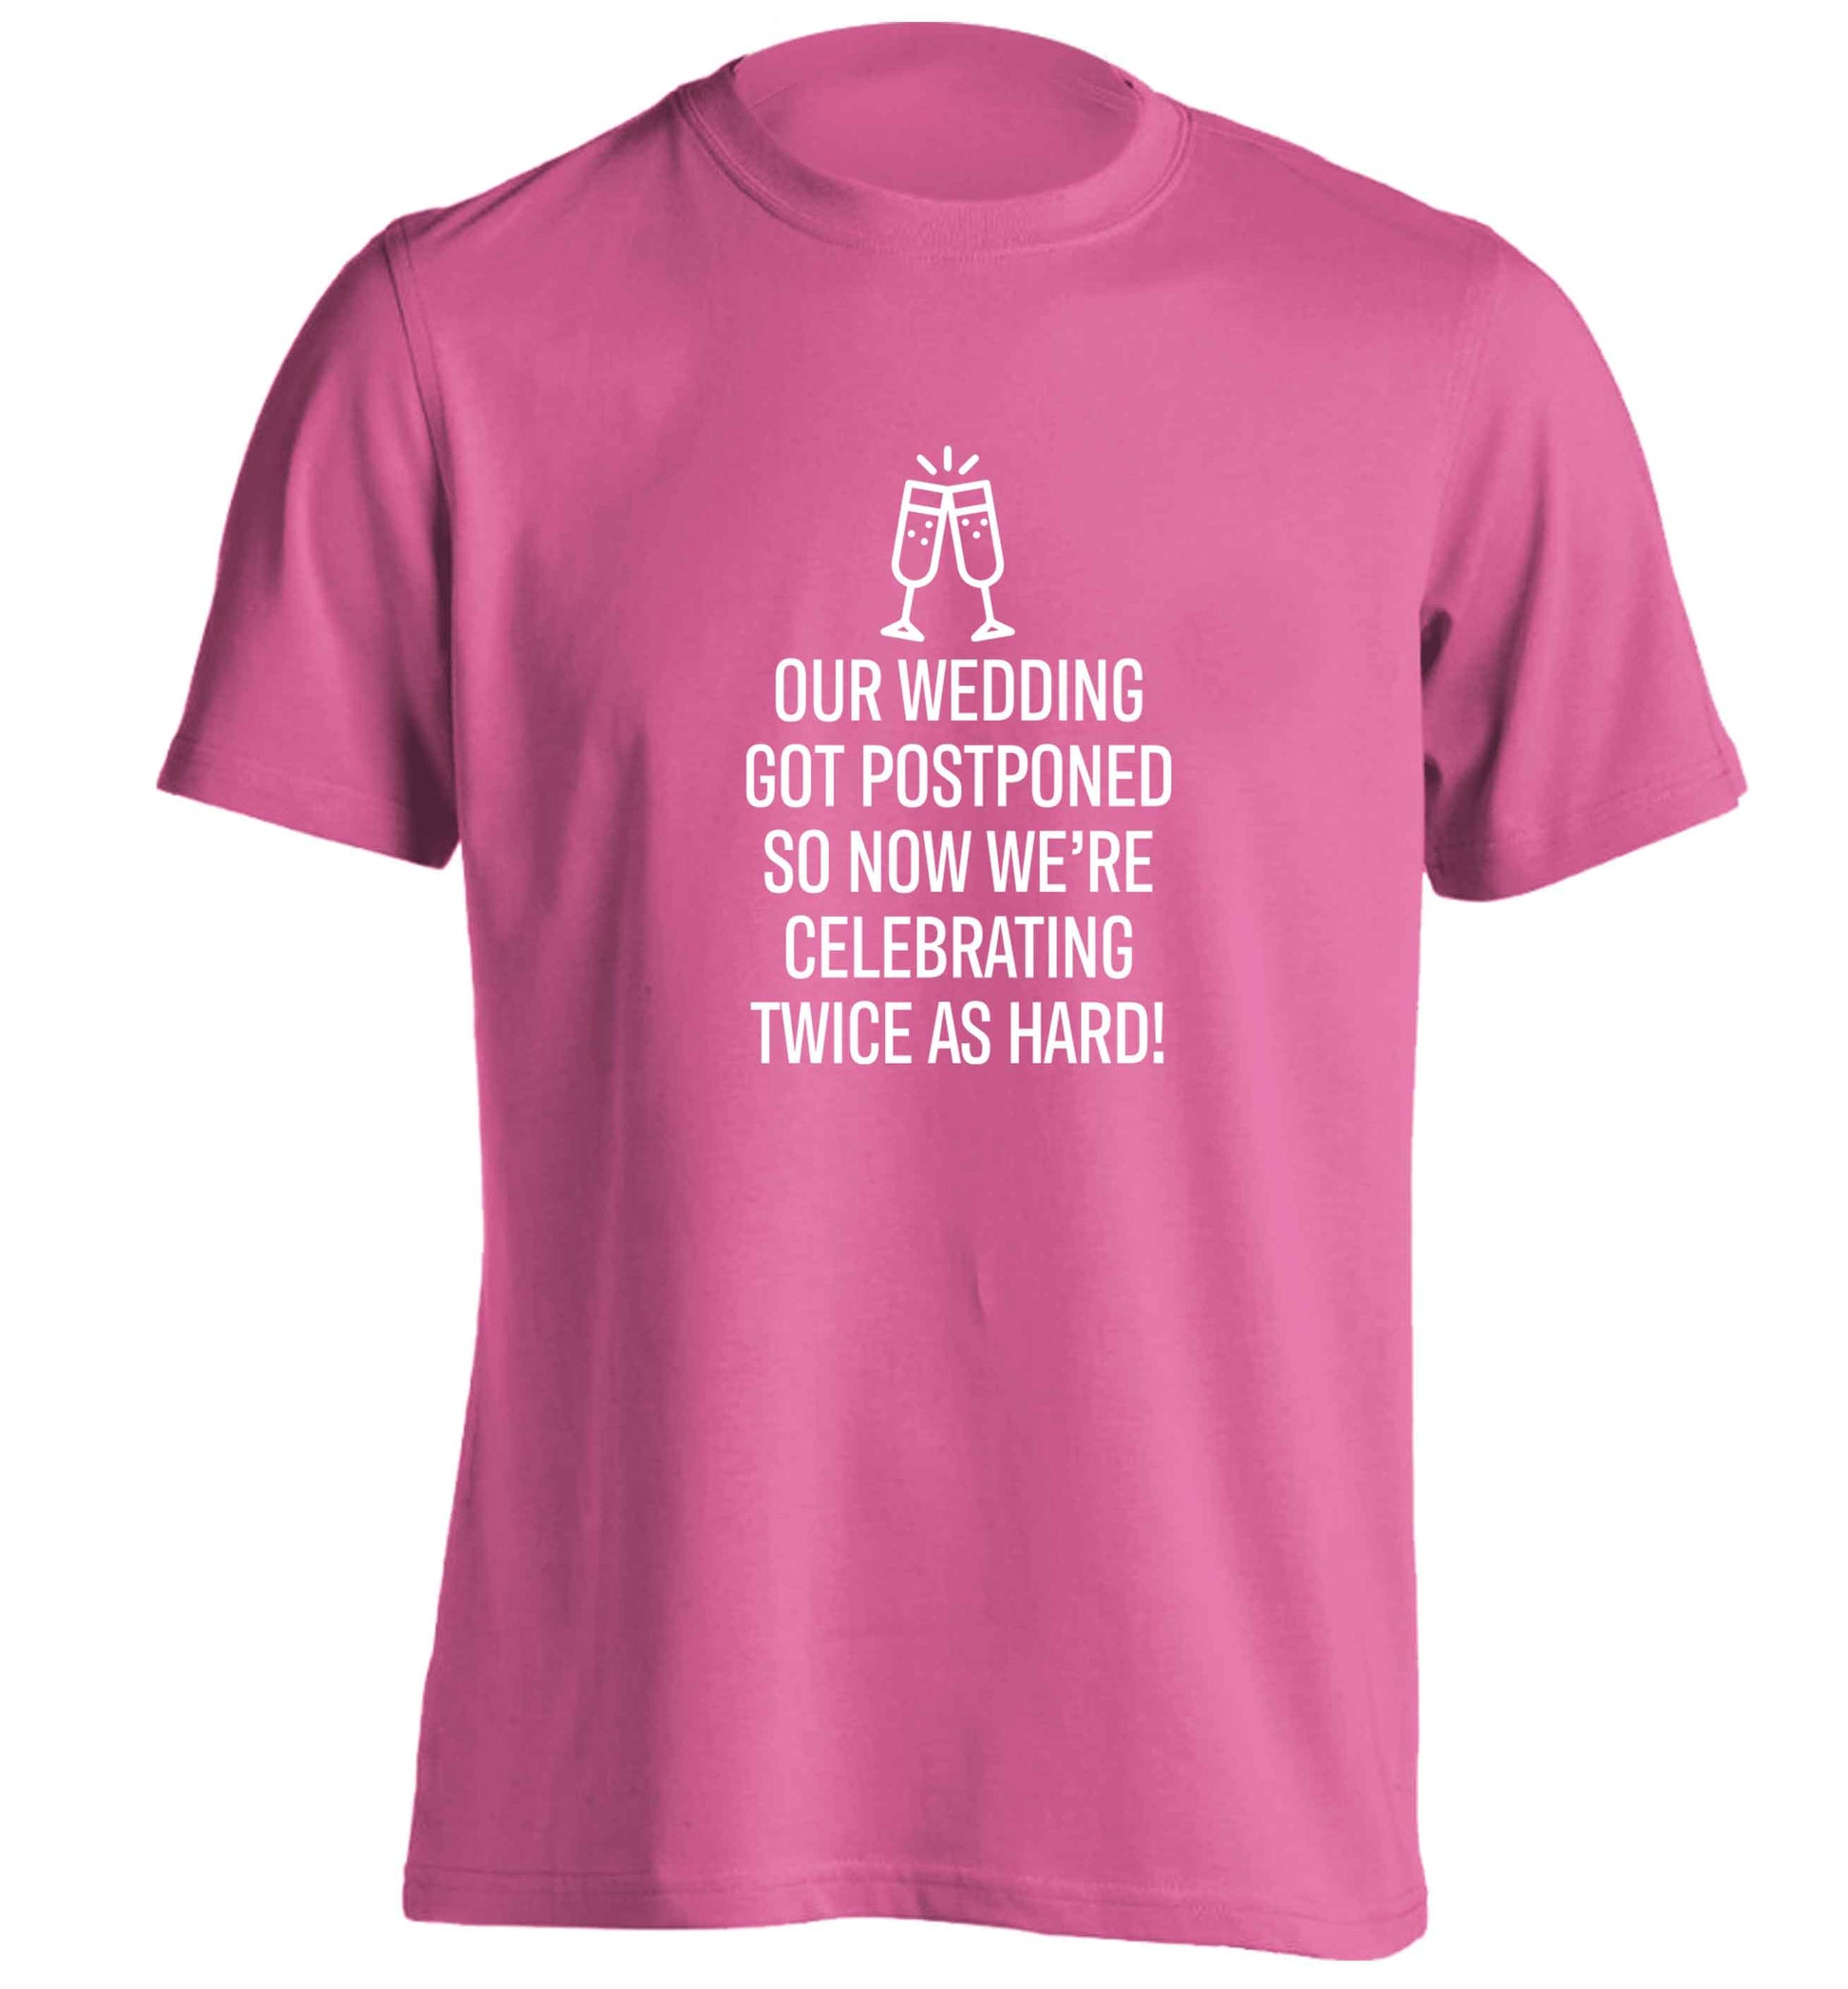 Postponed wedding? Sounds like an excuse to party twice as hard!  adults unisex pink Tshirt 2XL